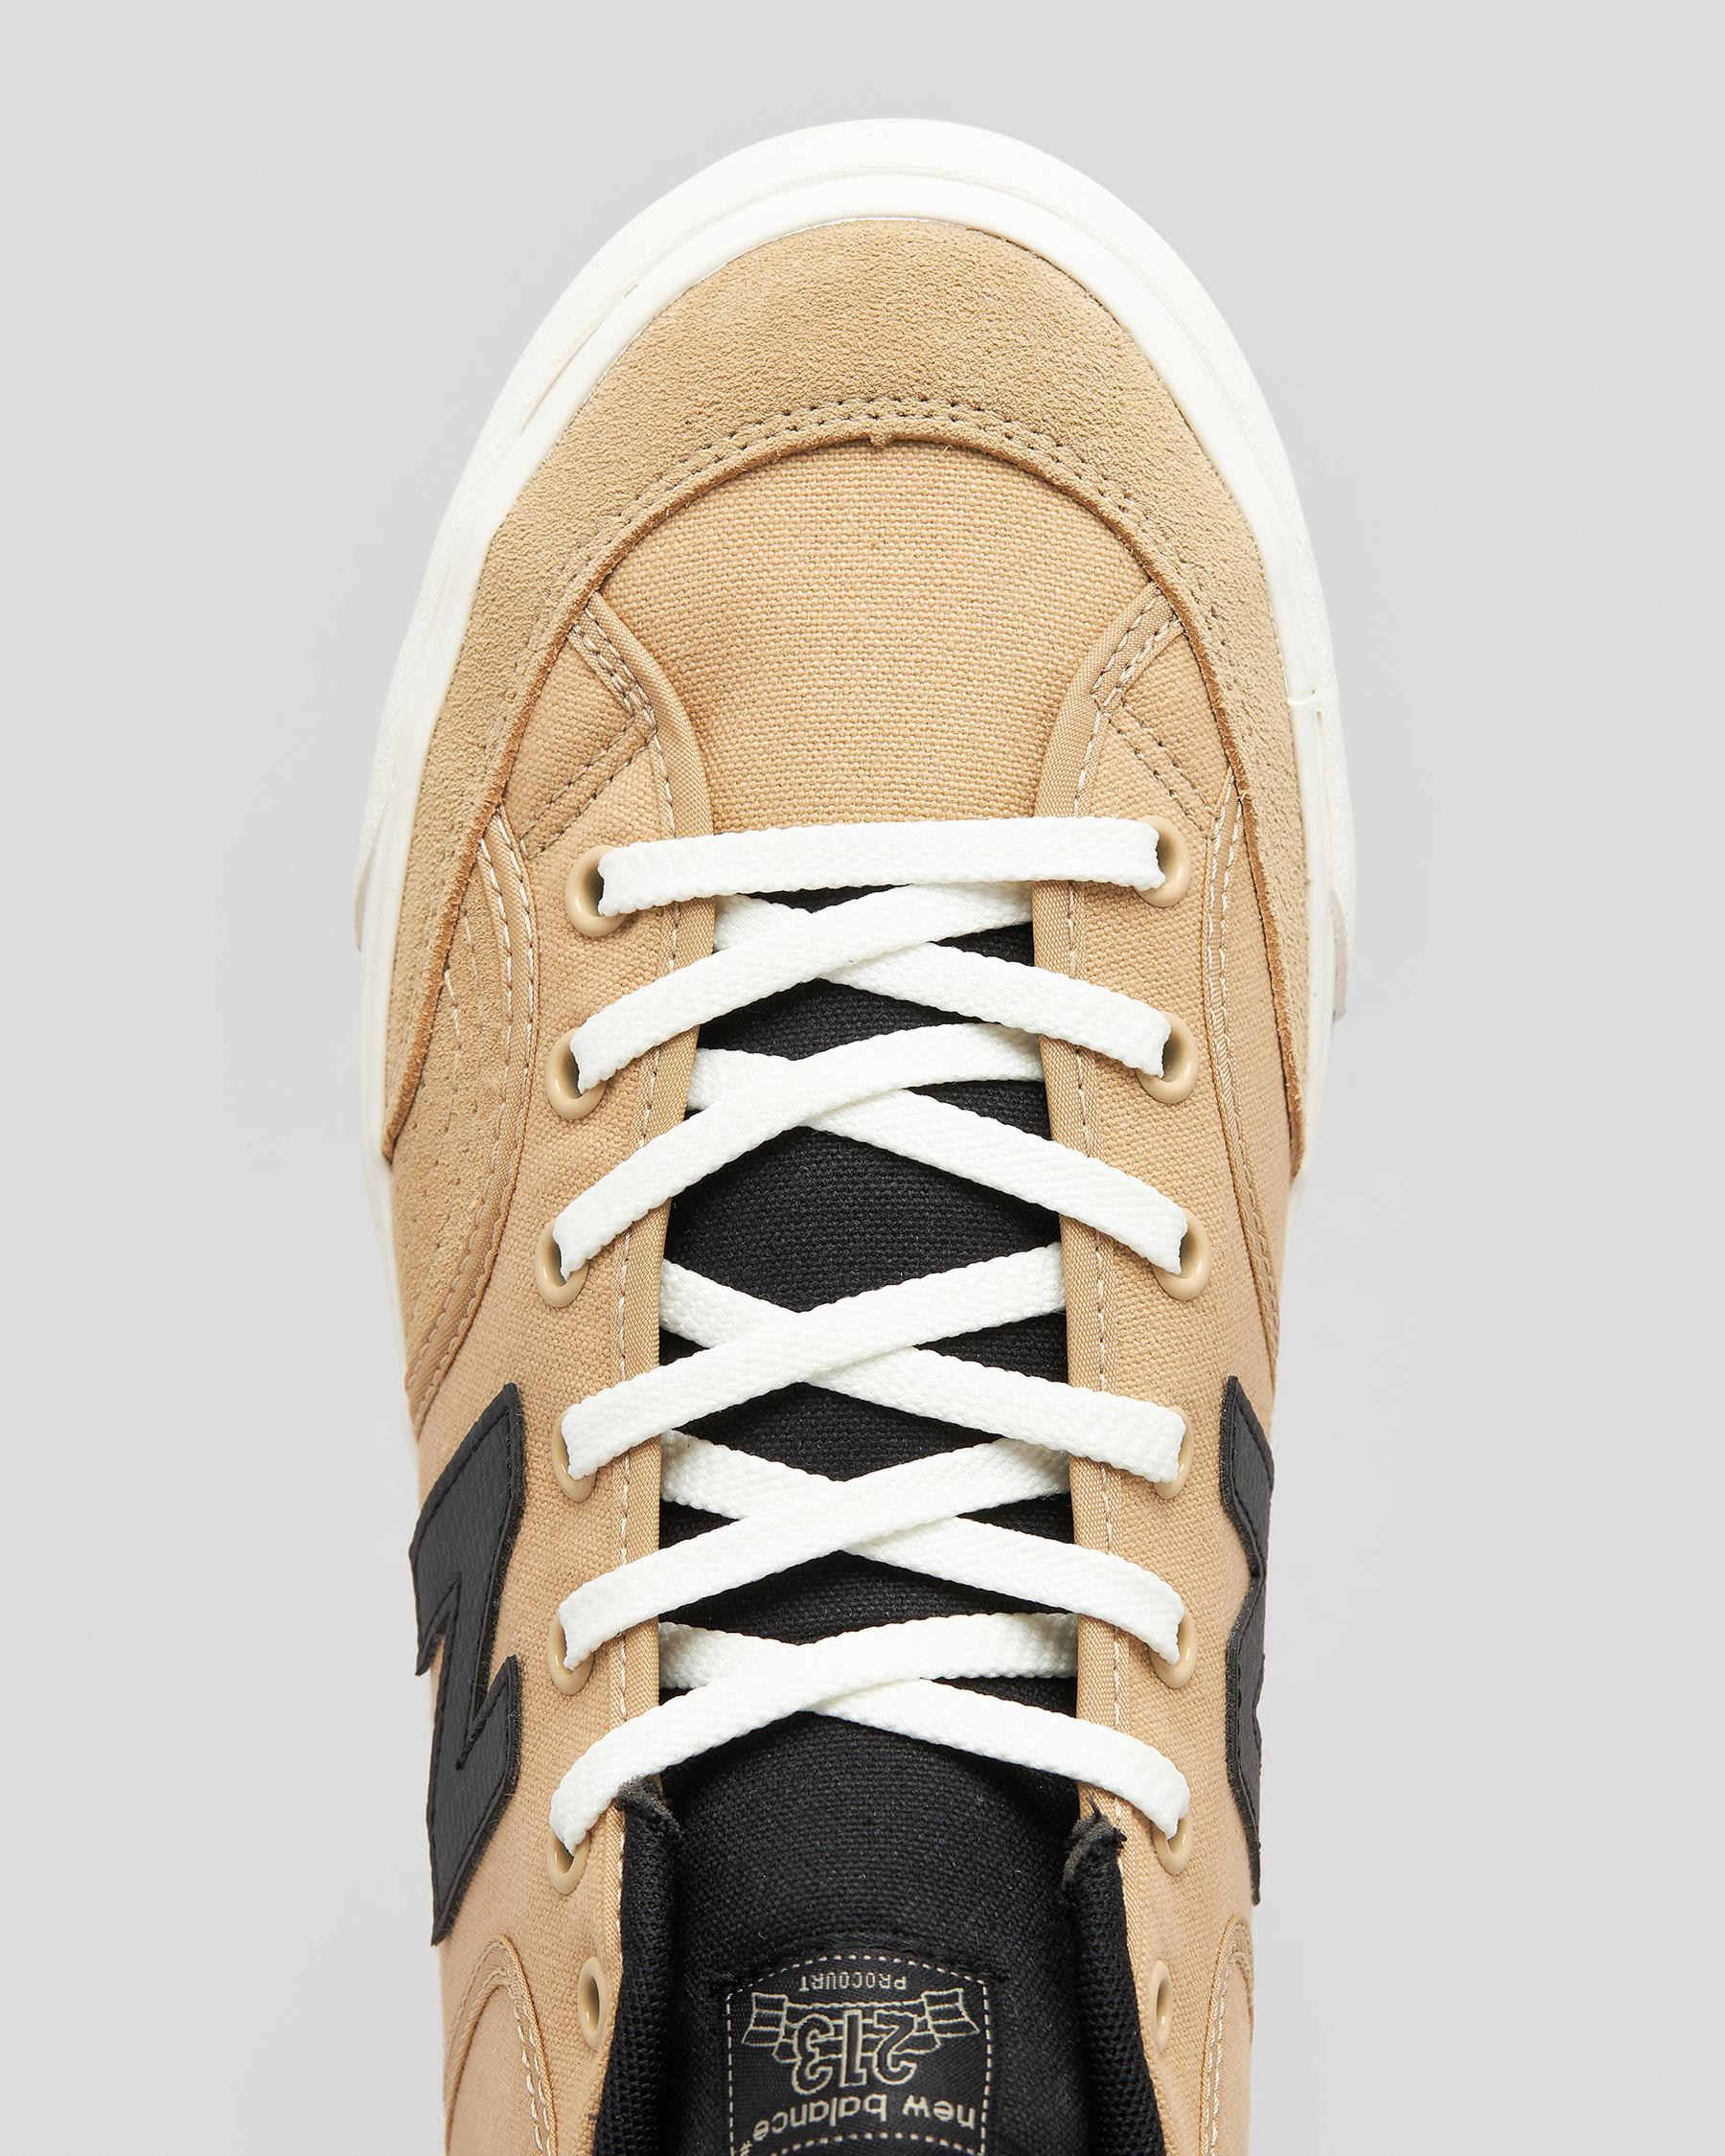 New Balance NB 213 Shoes In Tan/black - Fast Shipping & Easy Returns ...